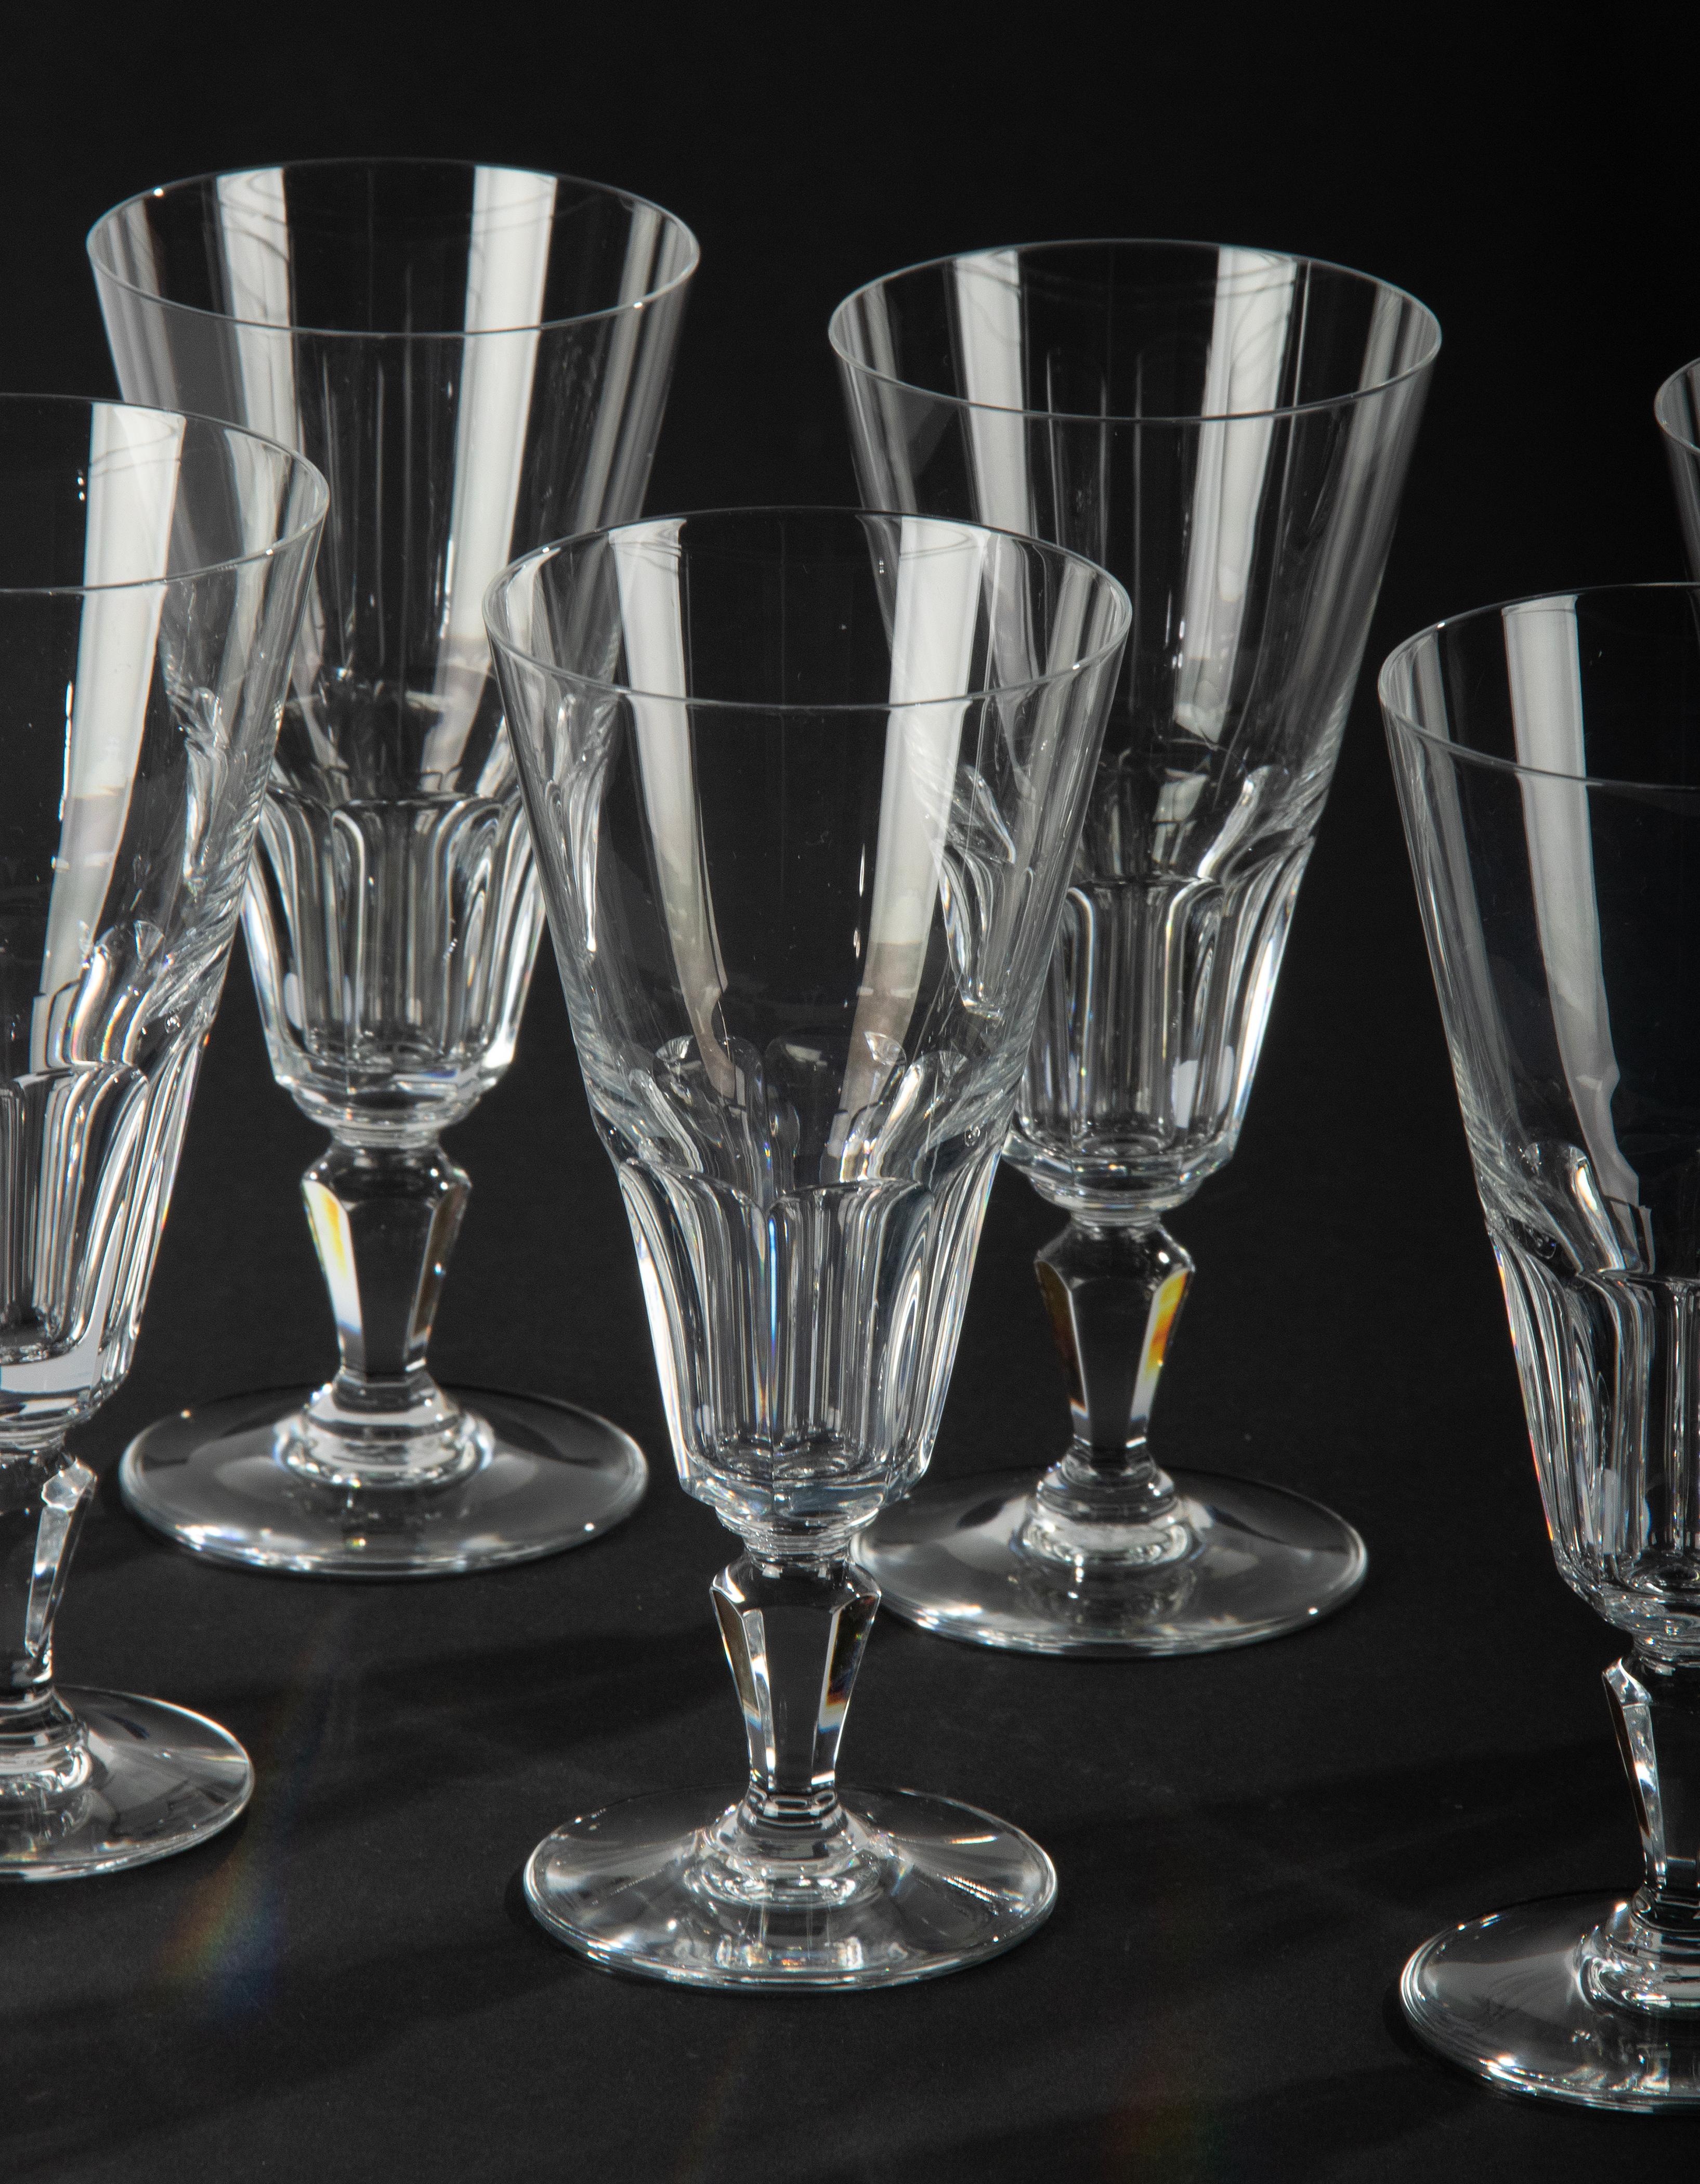 French Set of 6 Crystal Champagne Flutes Made by Baccarat